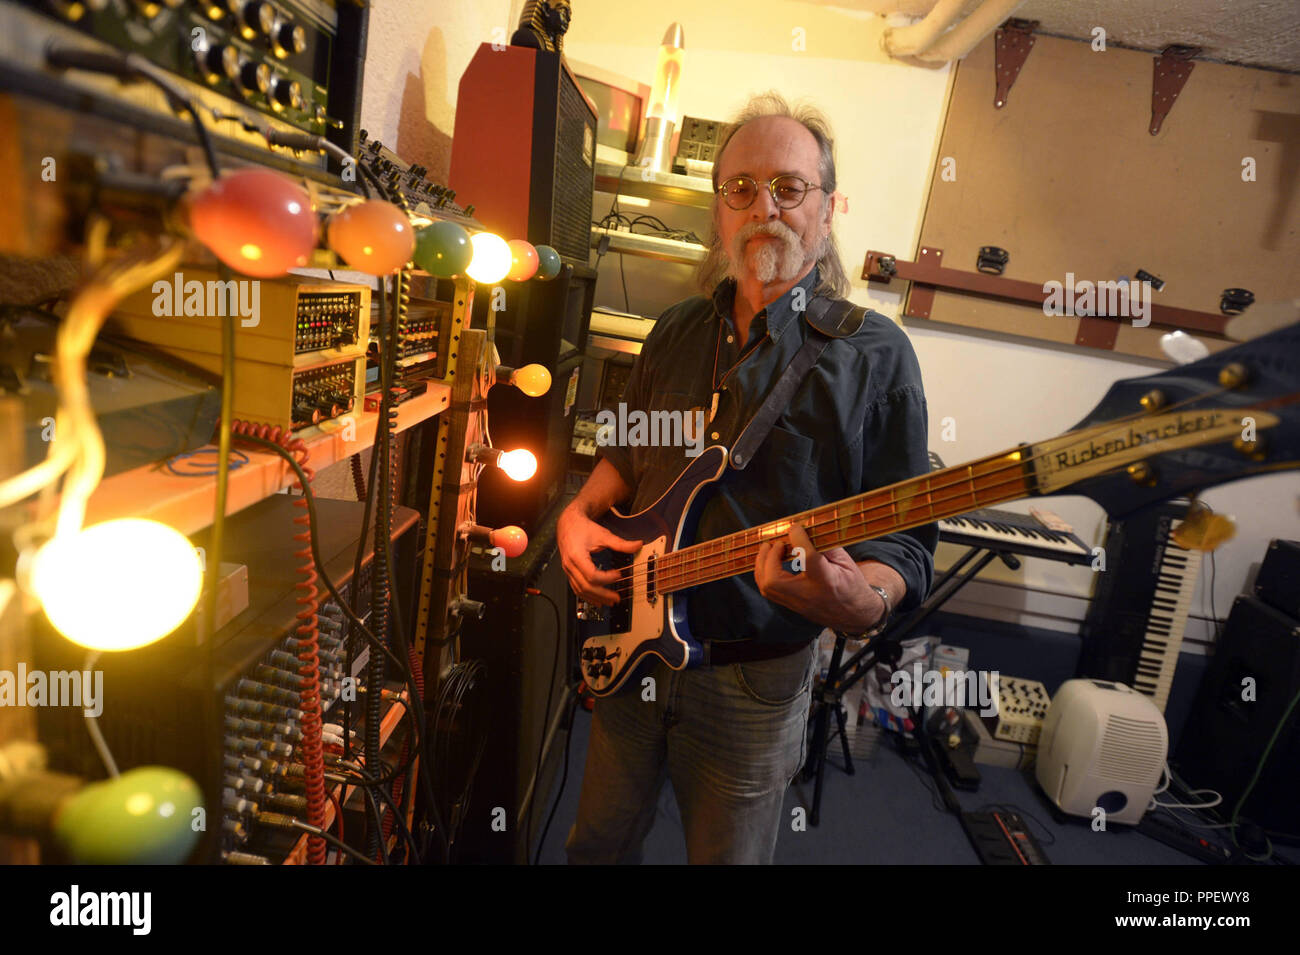 The composer, musician and painter Peter Frohmader, one of the first people who made Krautrock electronic music with homemade instruments in Germany, with a Rickenbacker electric bass guitar in his home in Munich Harlaching. Stock Photo